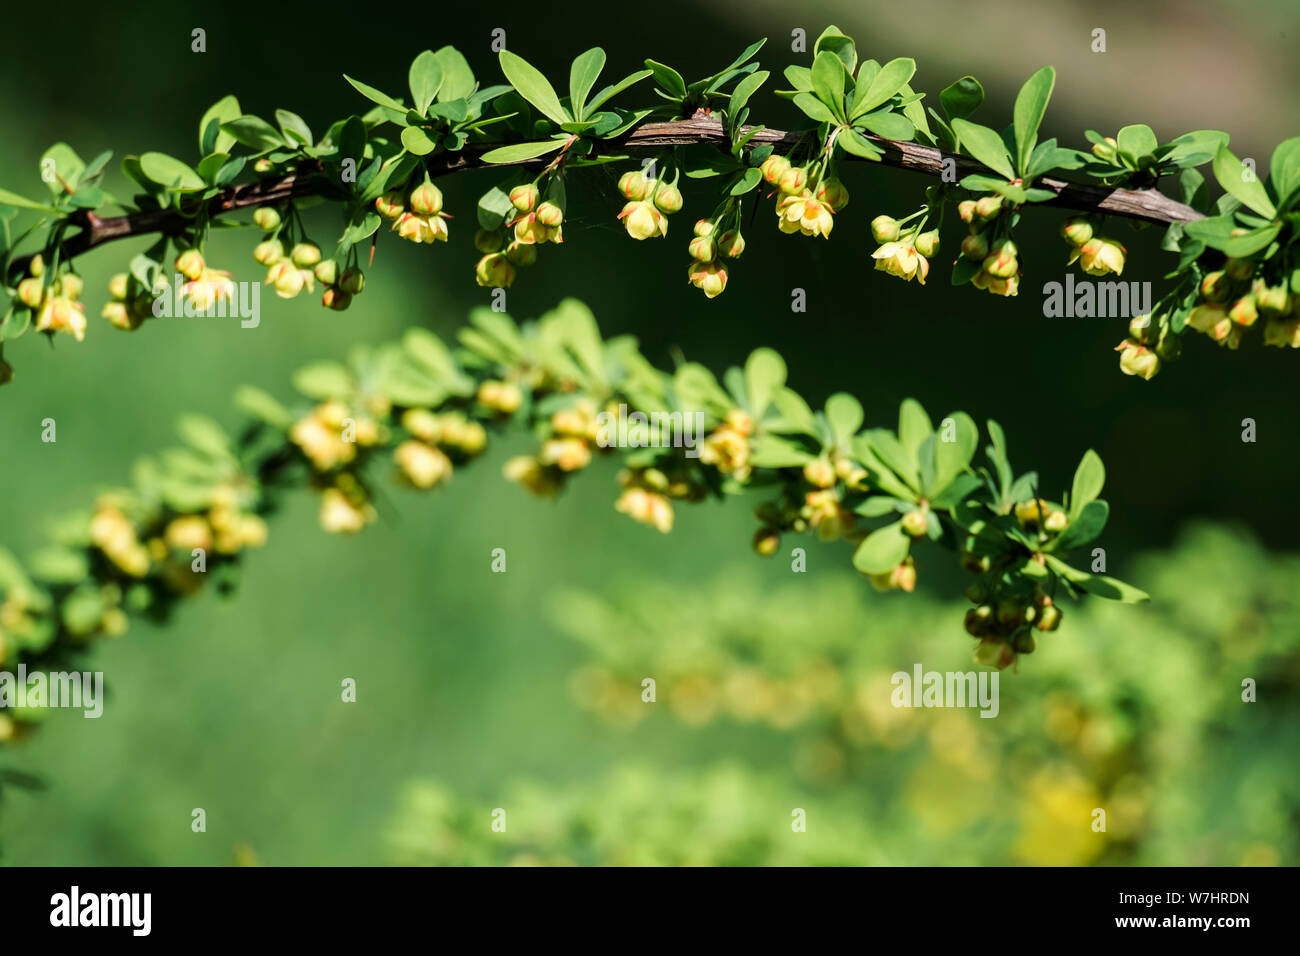 Young spring leaves and flowers of Japanese barberry (Berberis thunbergii) Stock Photo